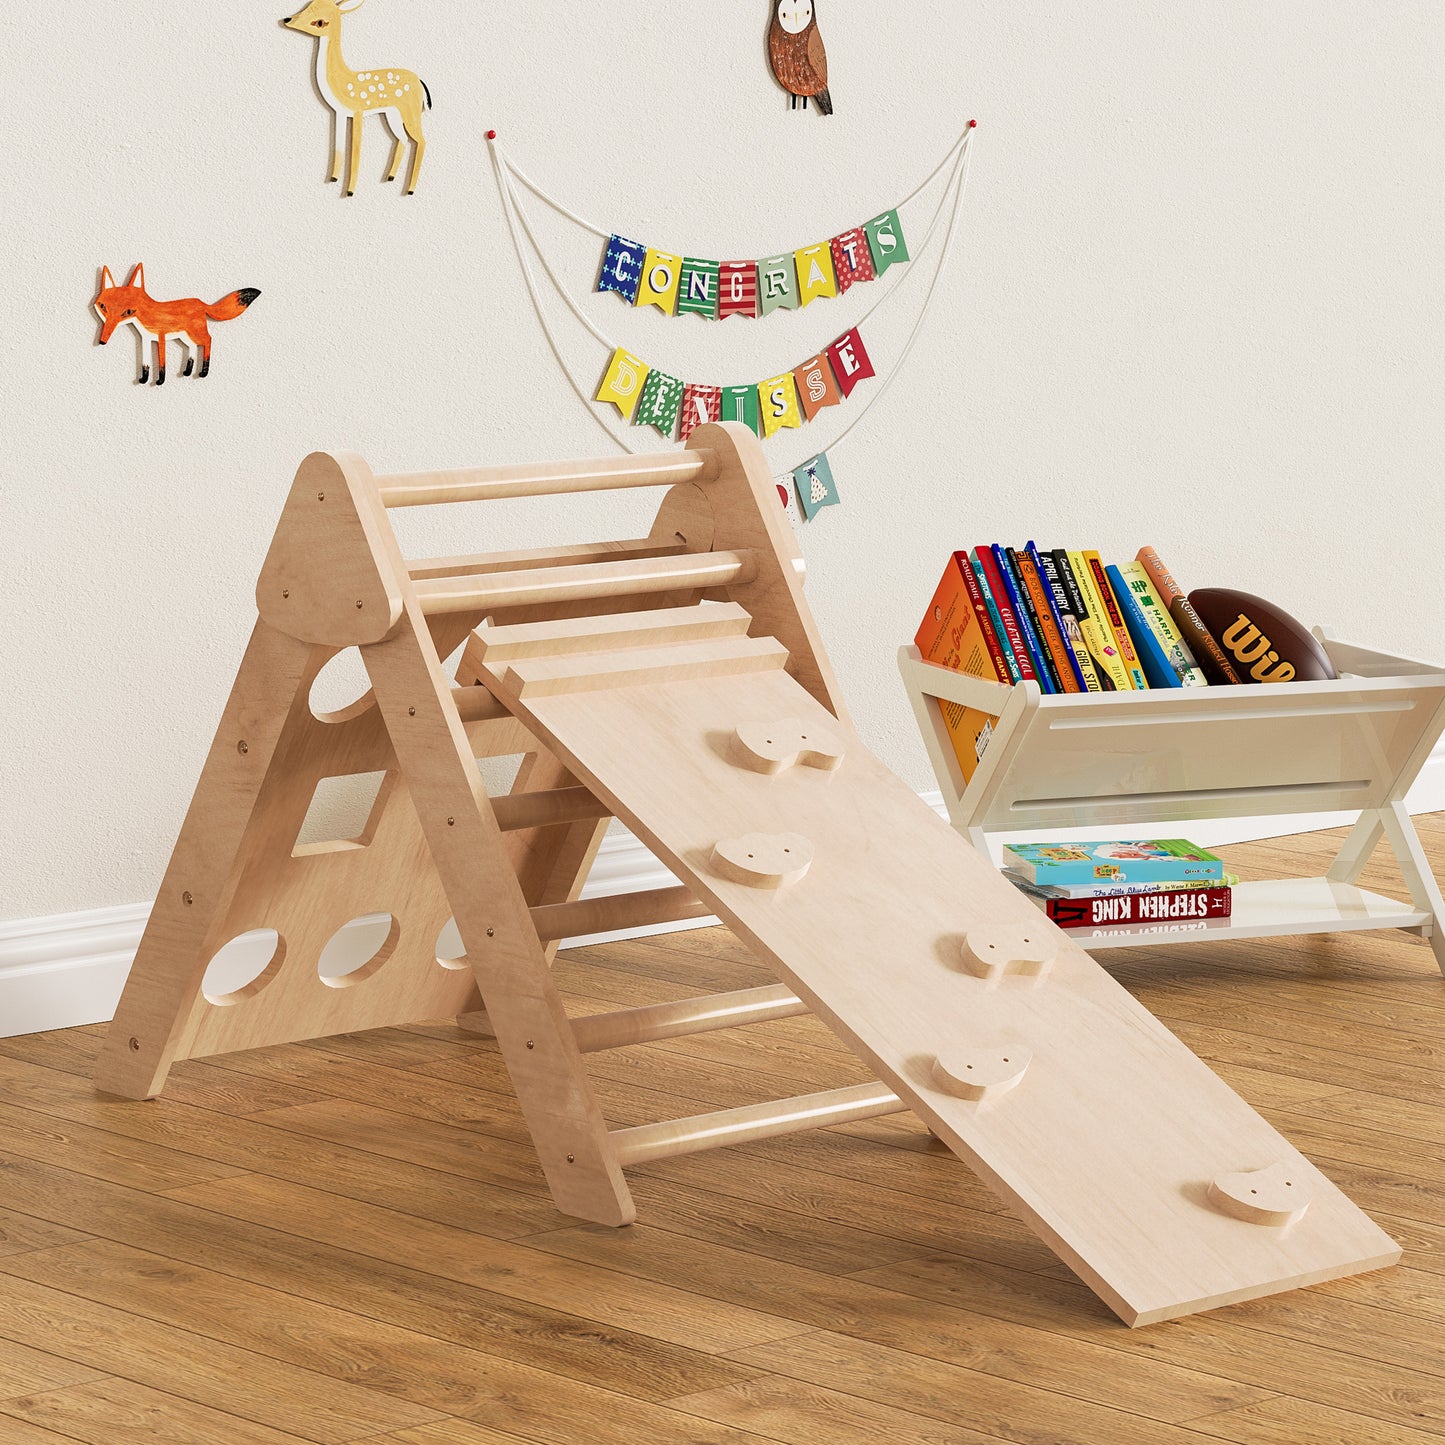 2 in 1 Wooden Climbing Toys for Toddlers, Foldable Pikler Triangle Climber with Ramp for Sliding or Climbing, Oak